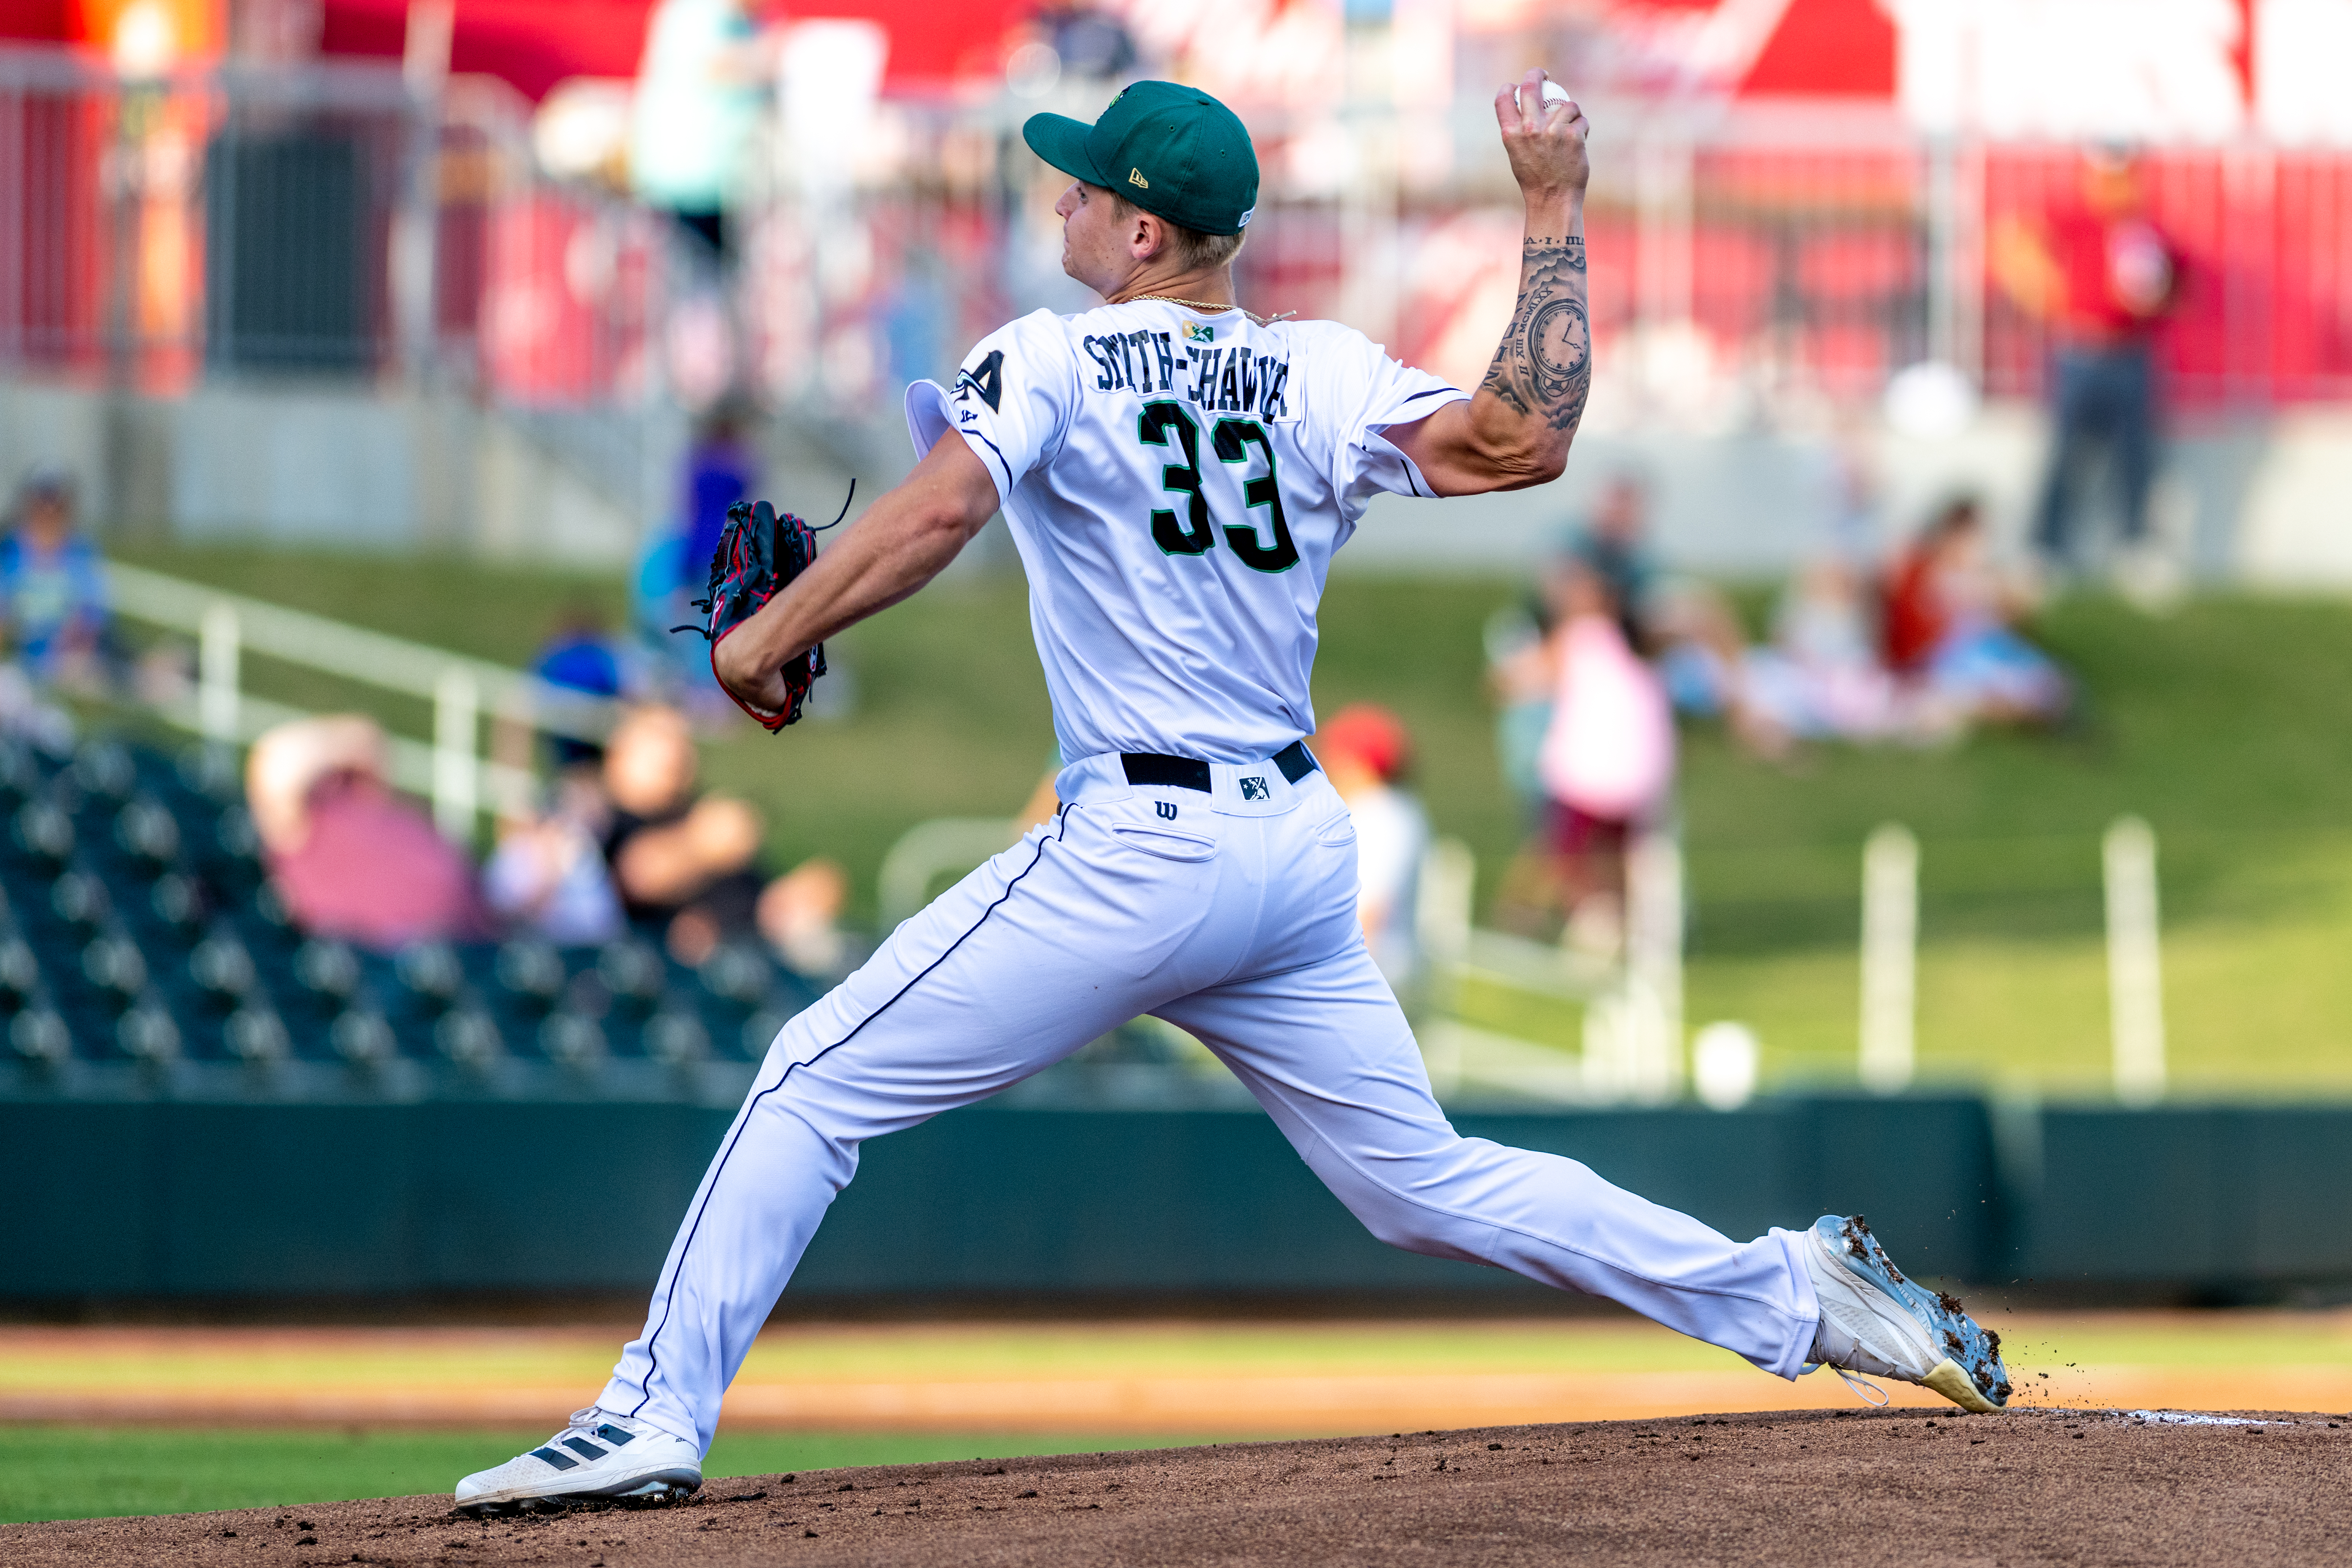 AJ Smith-Shawver delivers a pitch for the Augusta GreenJackets